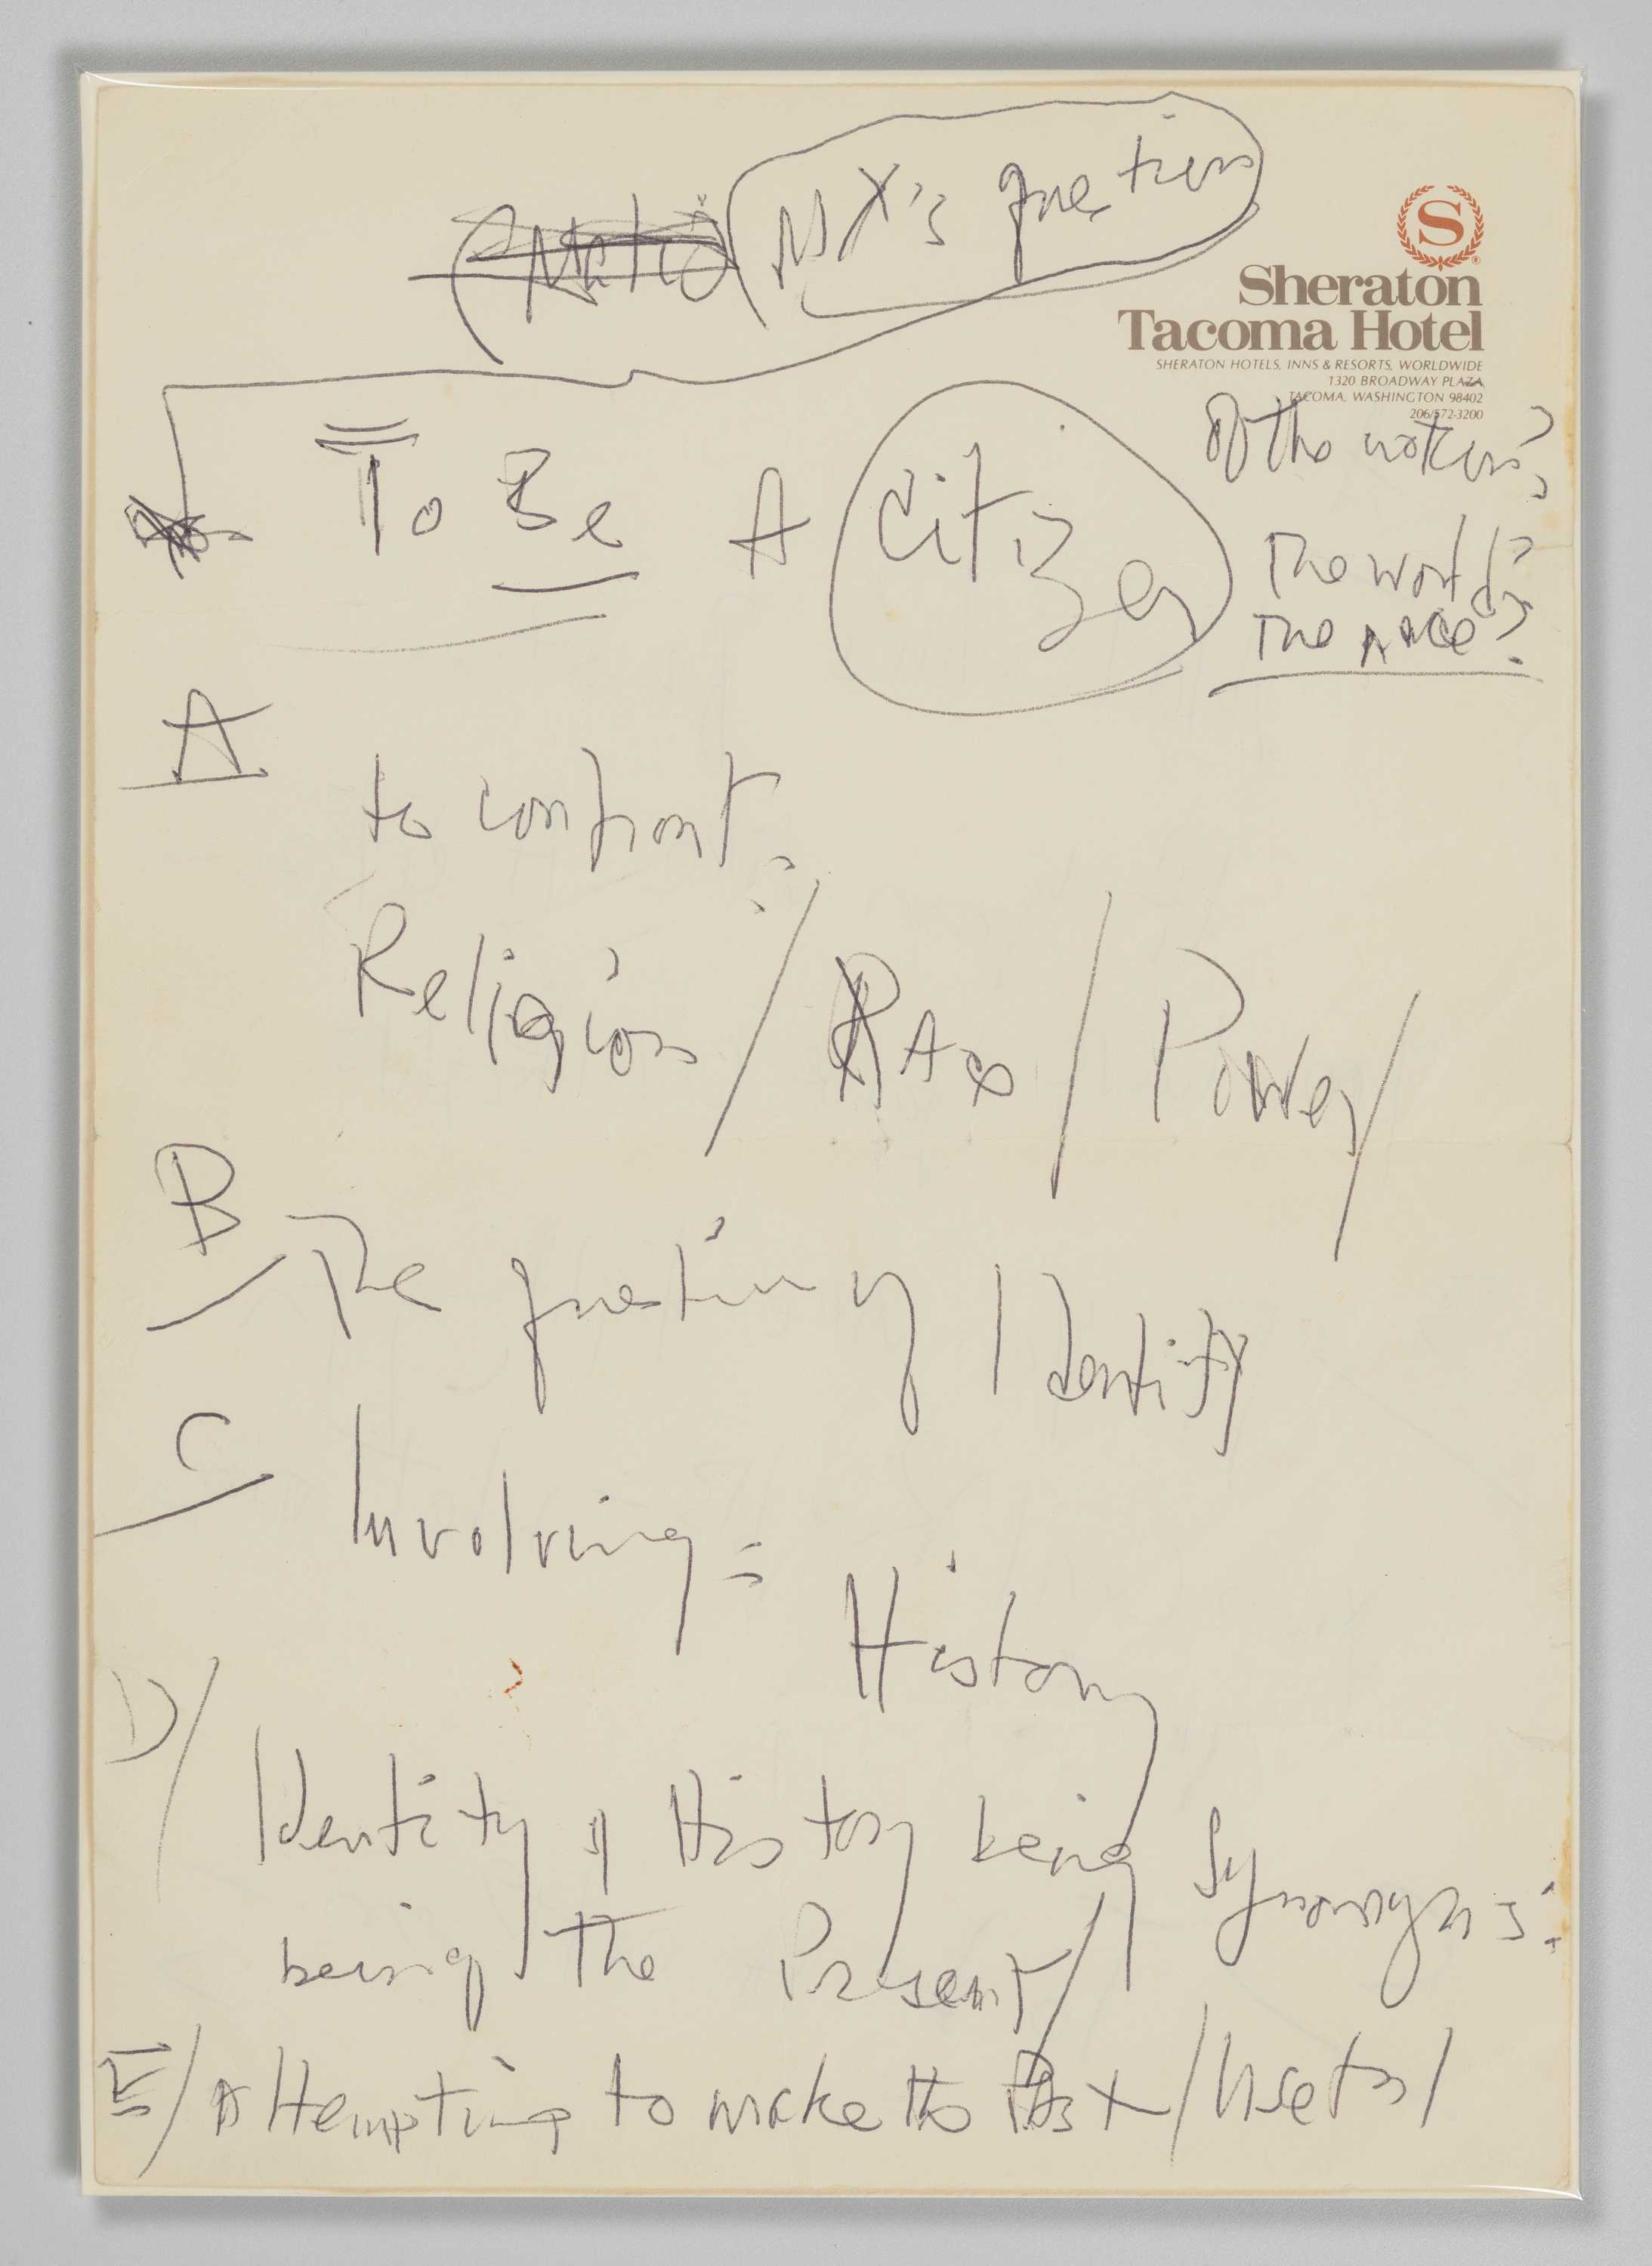 Image of handwritten notes by James Baldwin written in black in on aged Sheraton Tacoma Hotel letterhead.